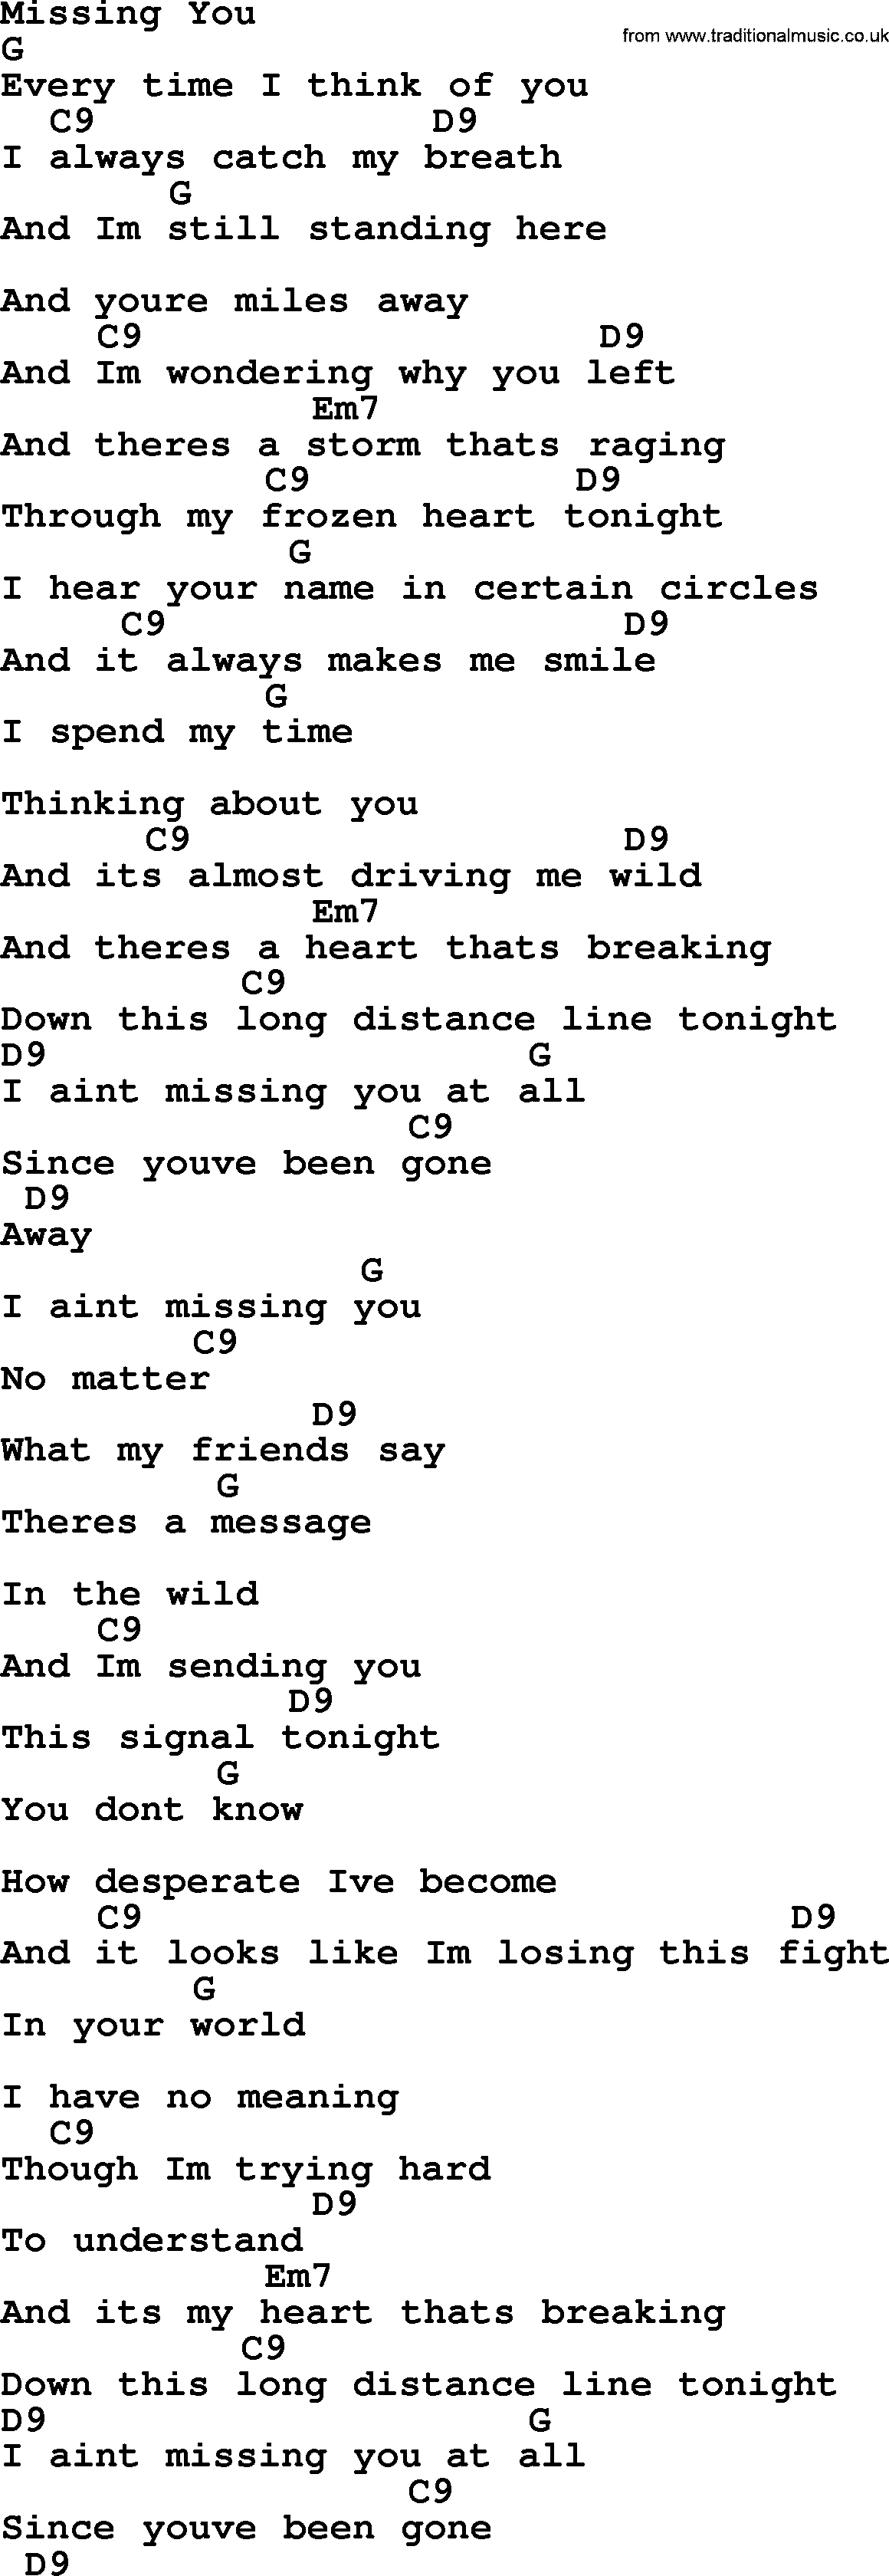 Bluegrass song: Missing You, lyrics and chords